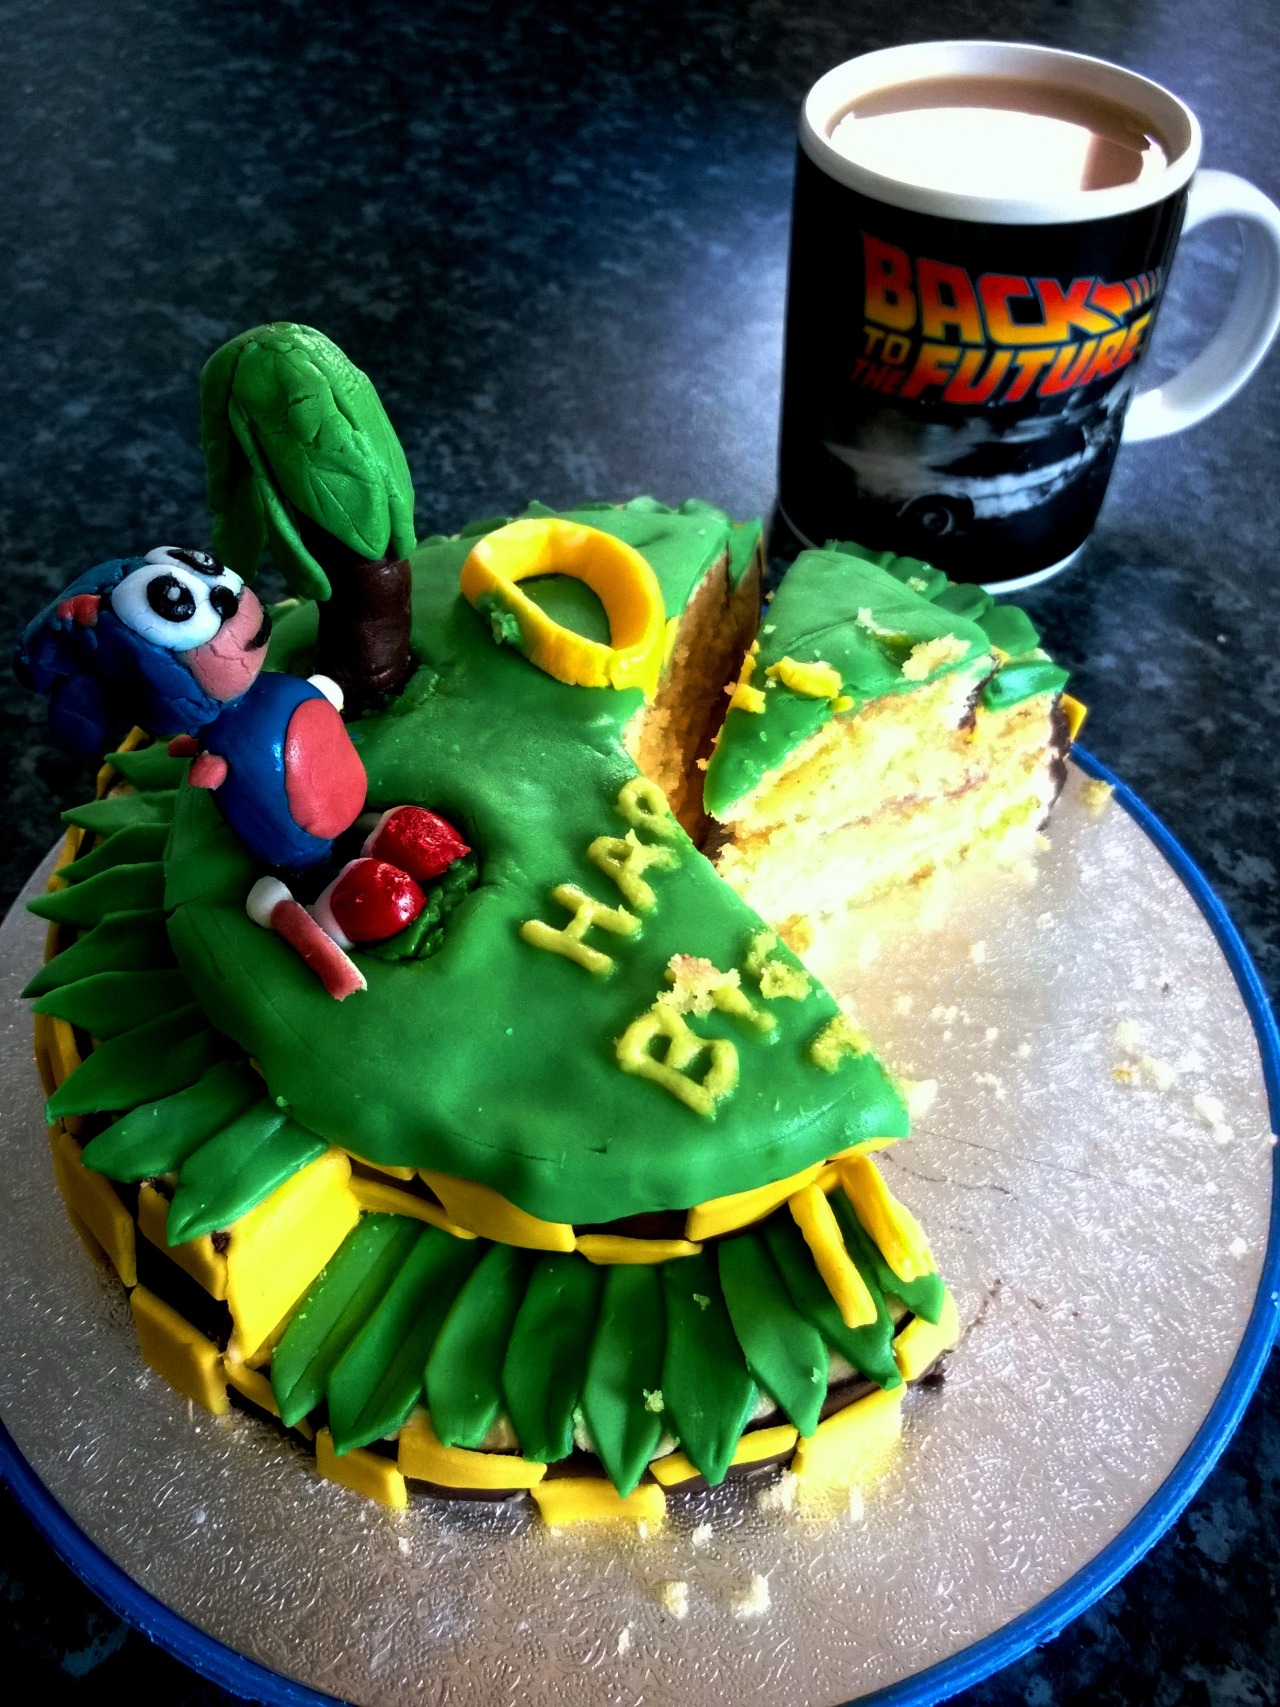 byway:

It’s Sunday afternoon and time for a cup of tea and some 10 day old slightly melted home-made Sonic the Hedgehog birthday cake :P
